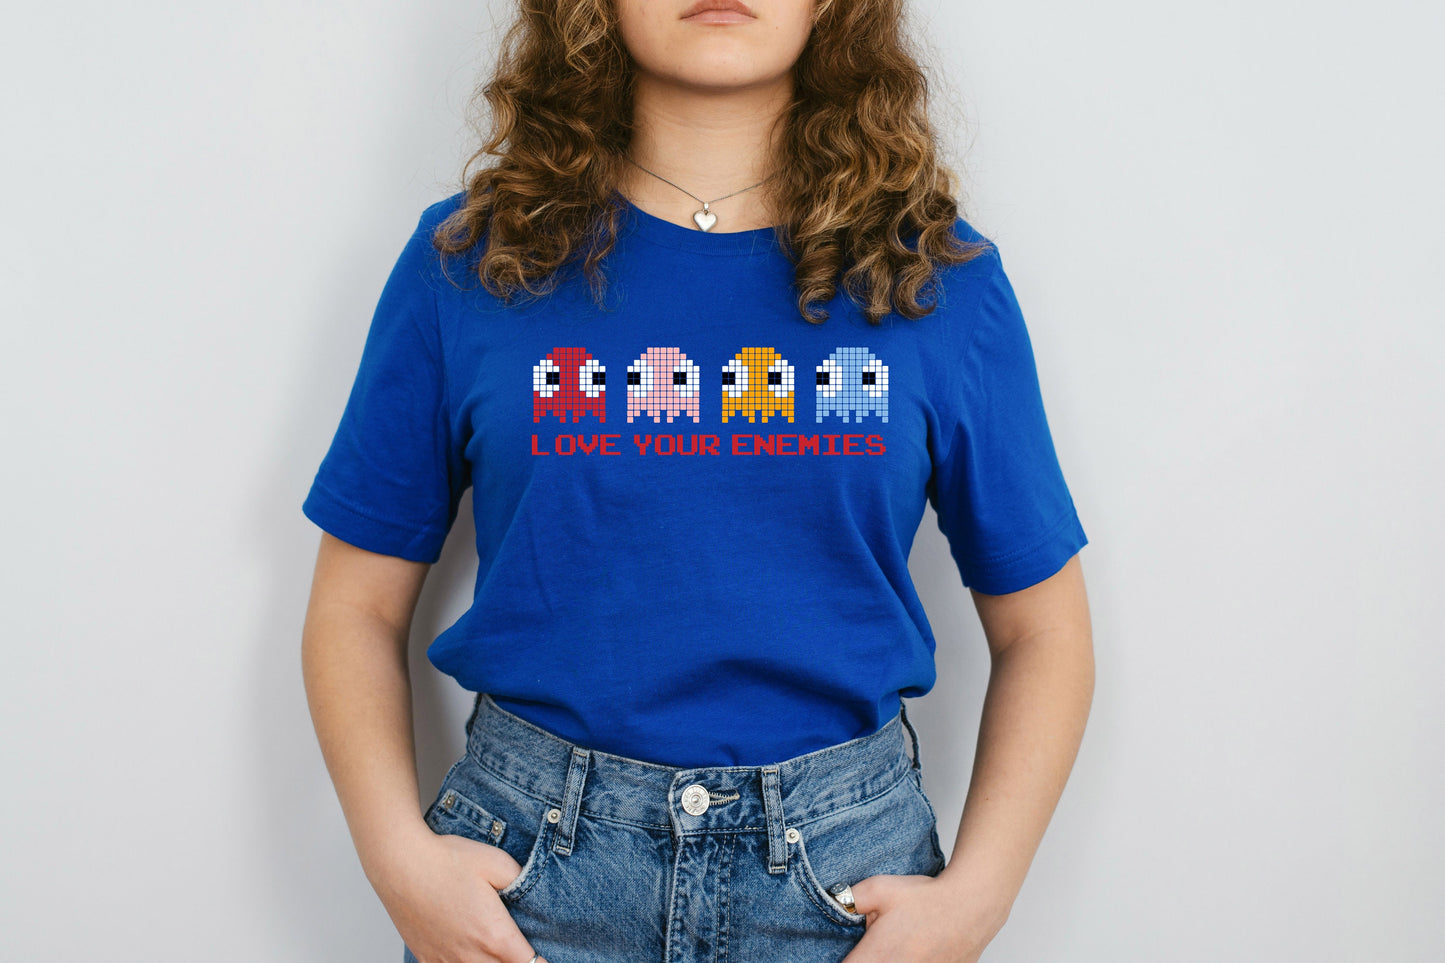 Love Your Enemies Video Game 1980's Ghosts Christian Ultra Soft Graphic Tee Unisex Soft Tee T-shirt for Women or Men